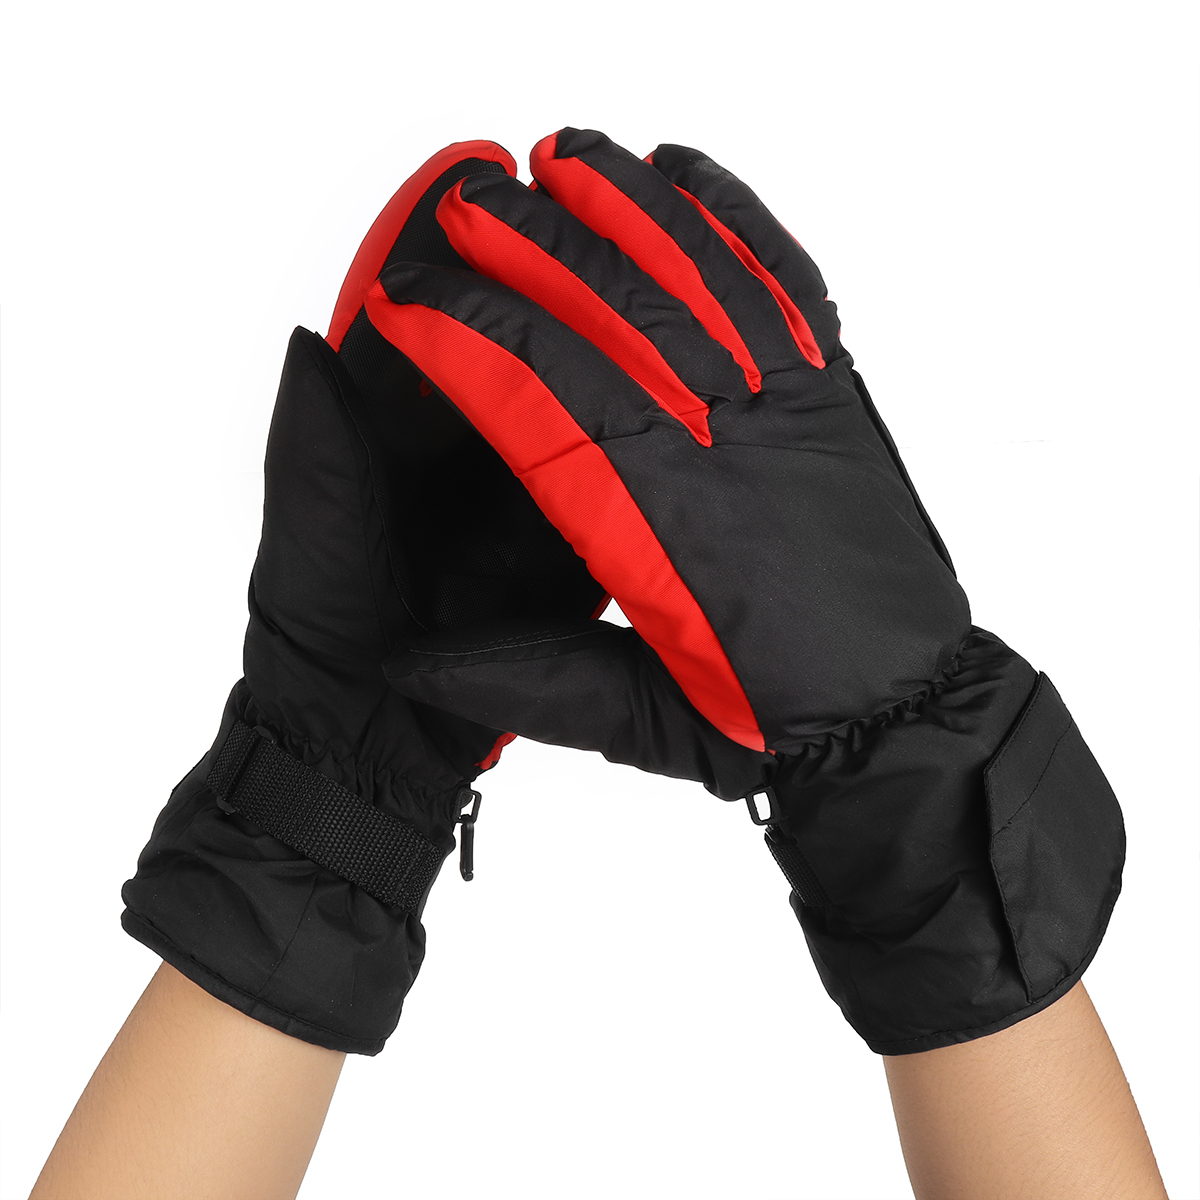 45V-Smart-Electric-Heated-Gloves-Winter-Ski-Cycling-Keep-Warm-Battery-Powered-Heating-Gloves-5-Finge-1771505-7